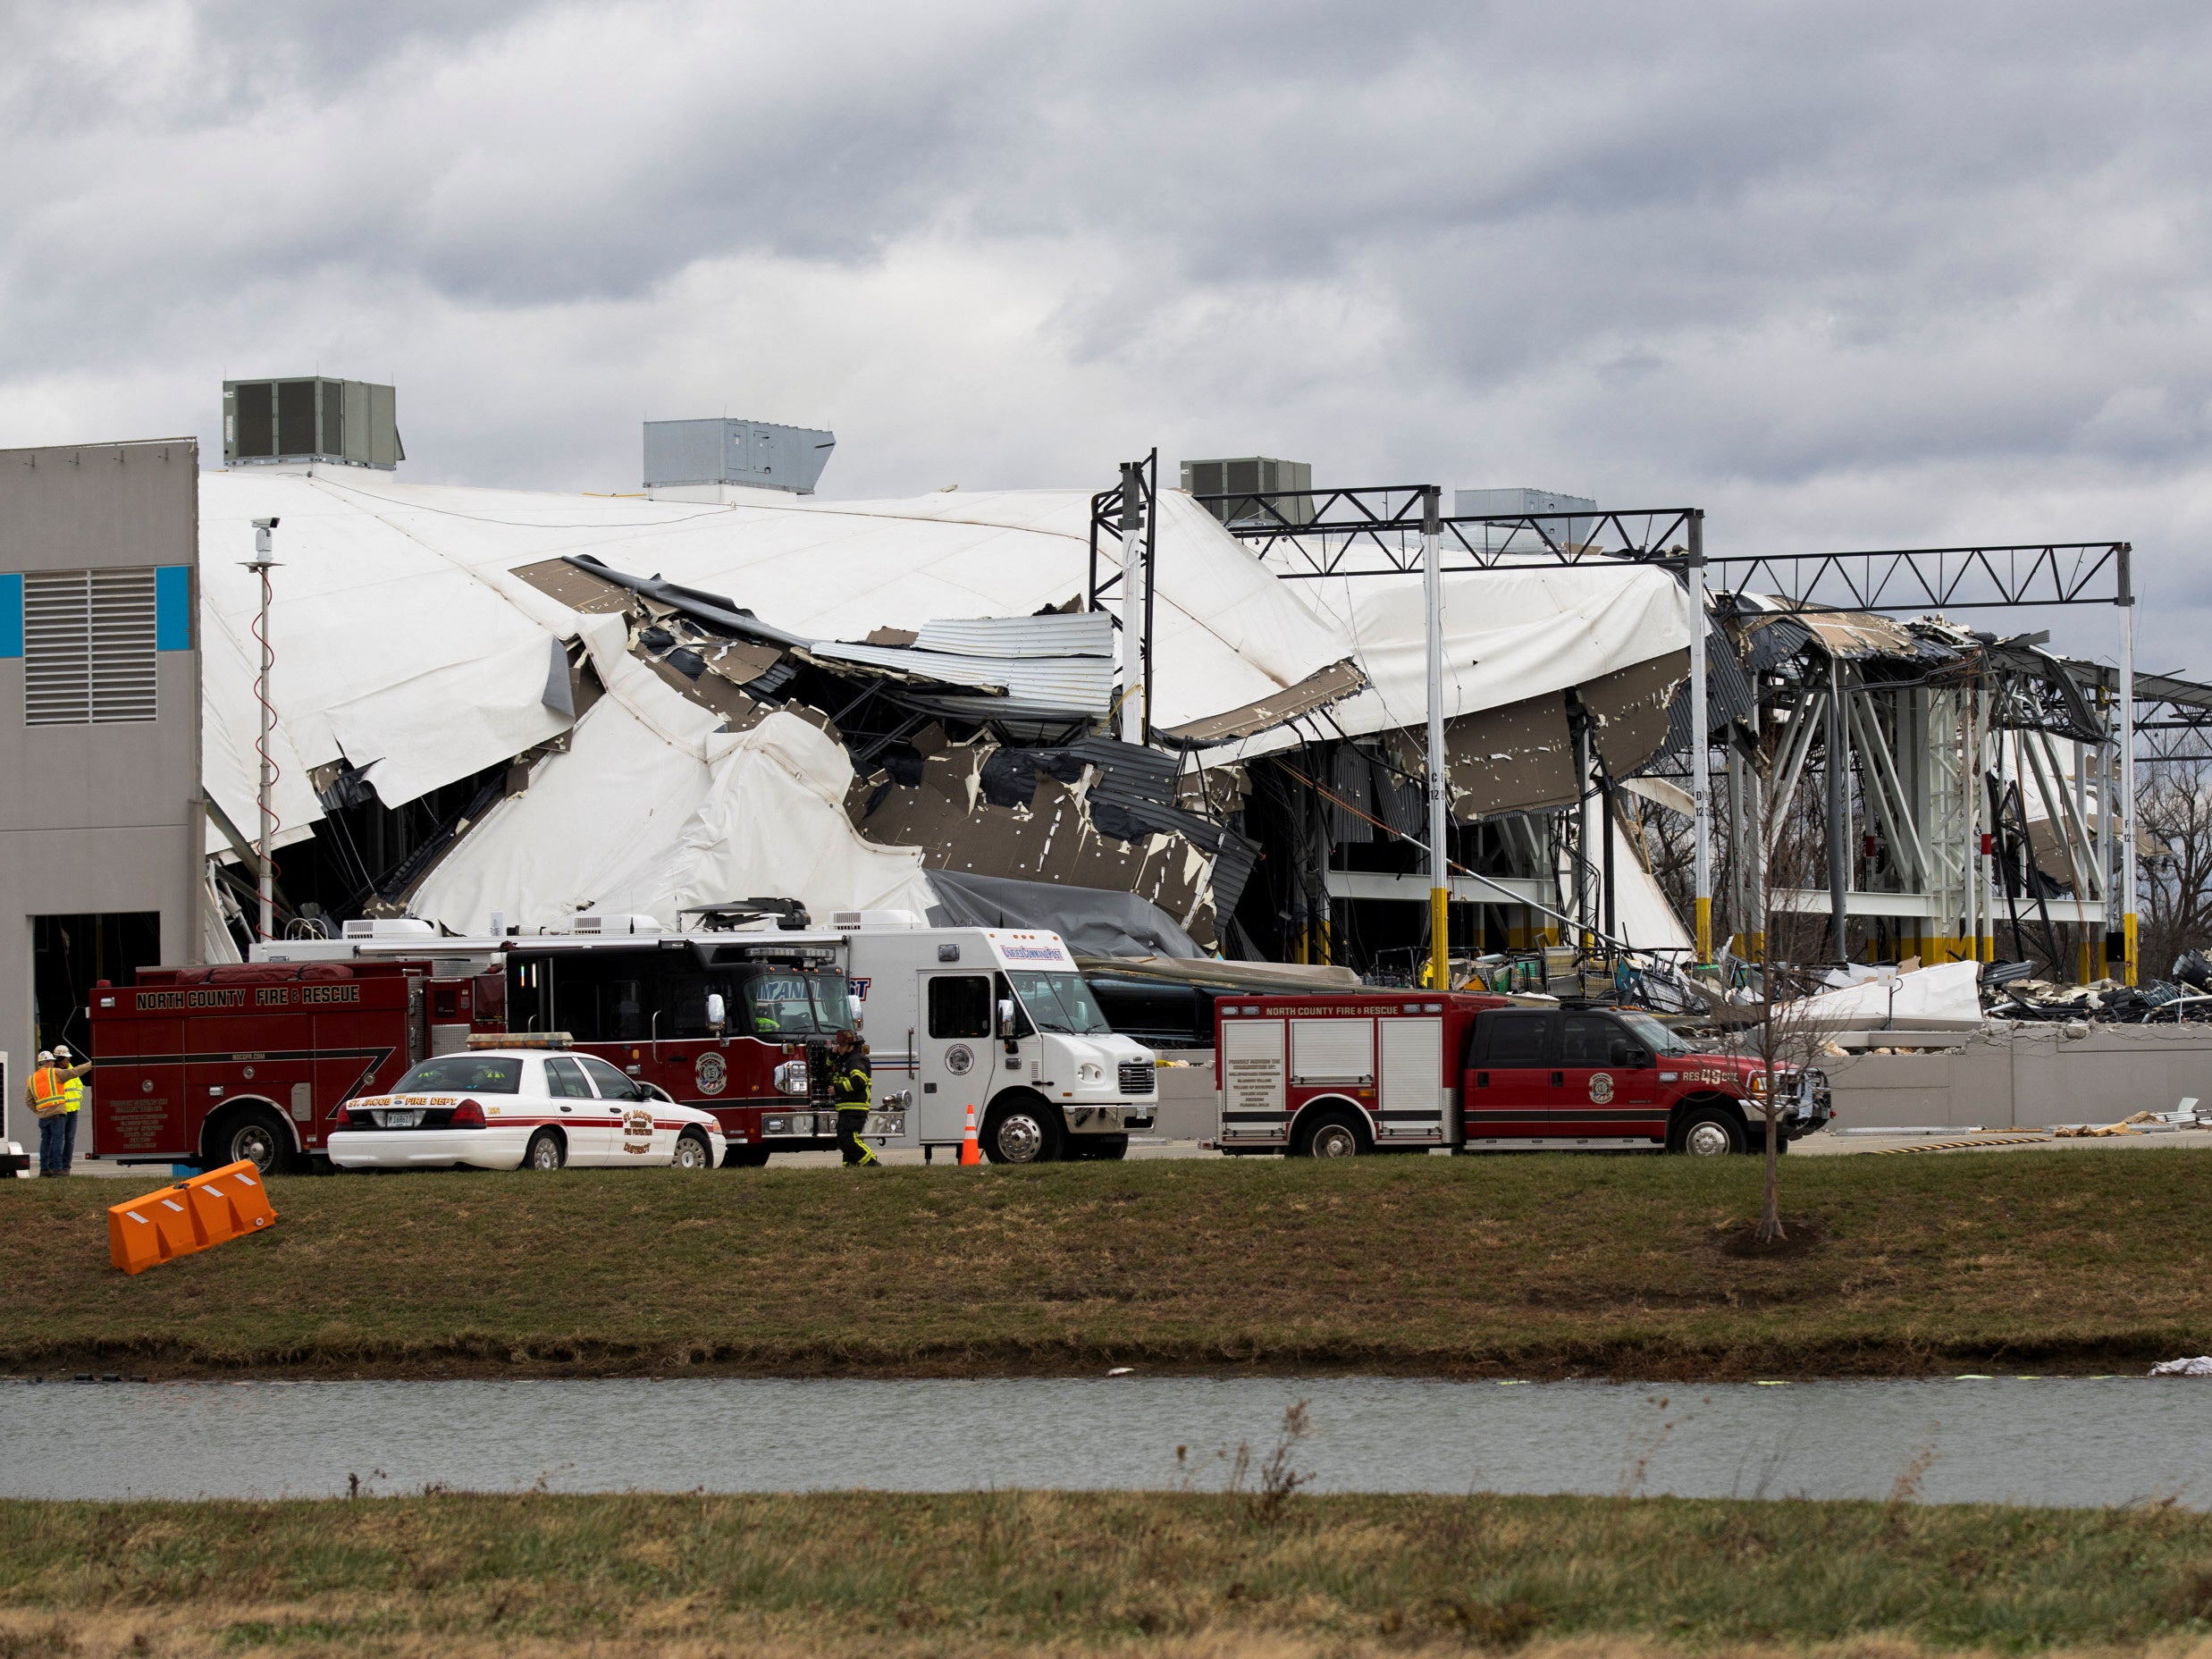 A collapsed roof is seen at an Amazon distribution center after a tornado hits Edwardsville, in Illinois, U.S. December 11, 2021